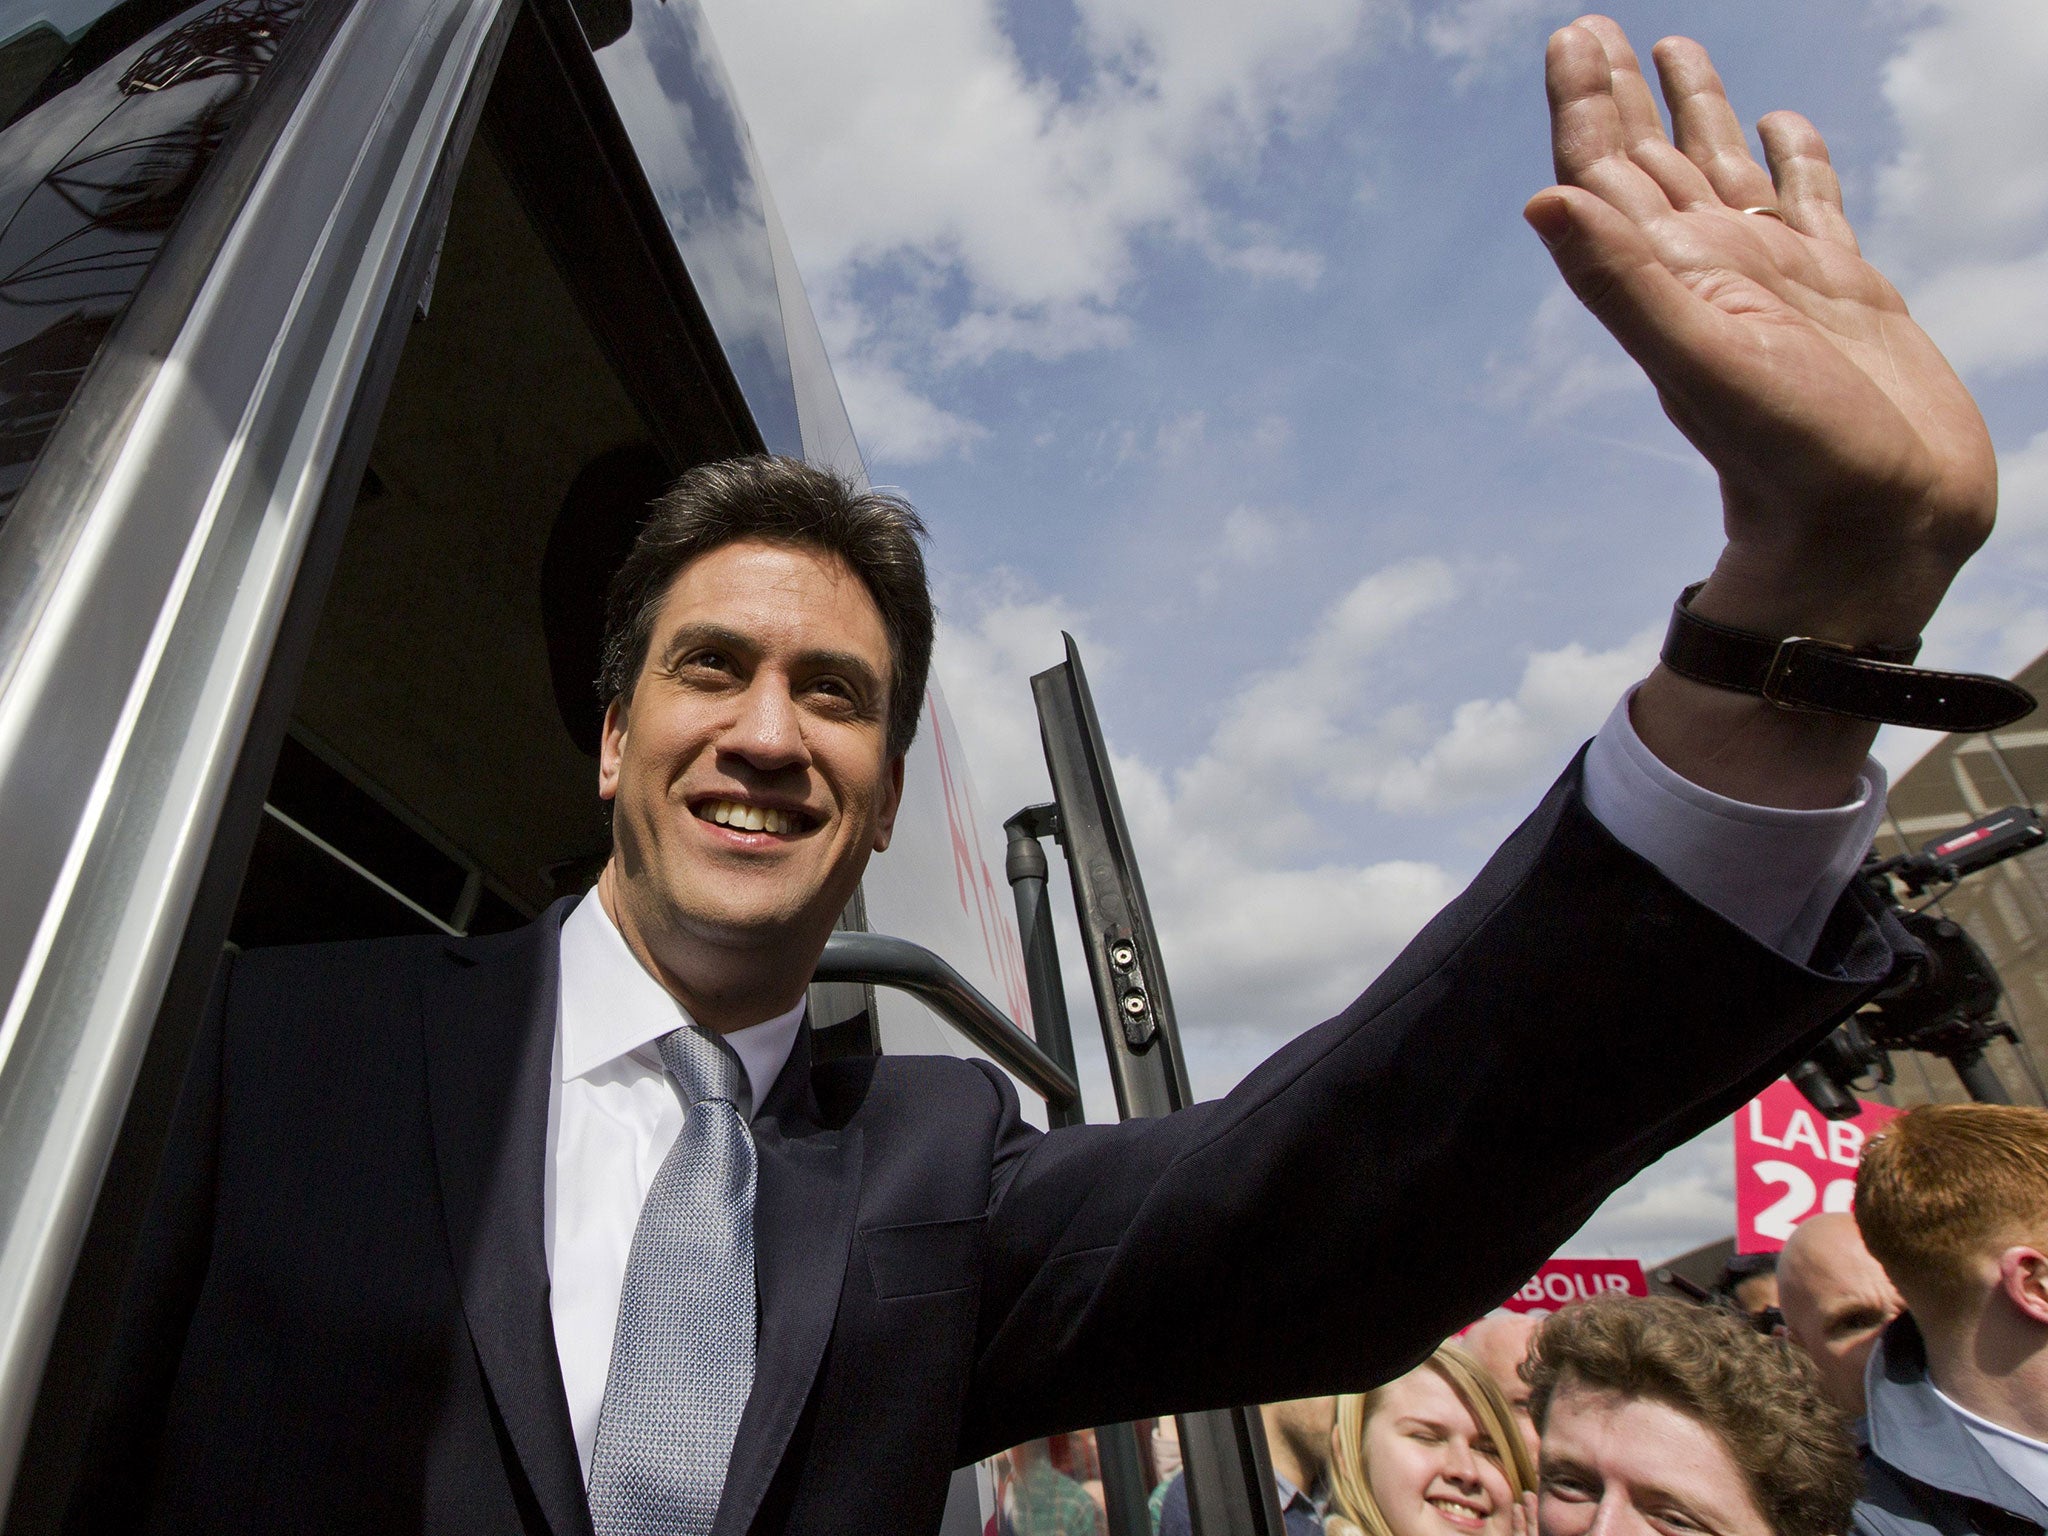 Ed Miliband has announced his plan for UK businesses